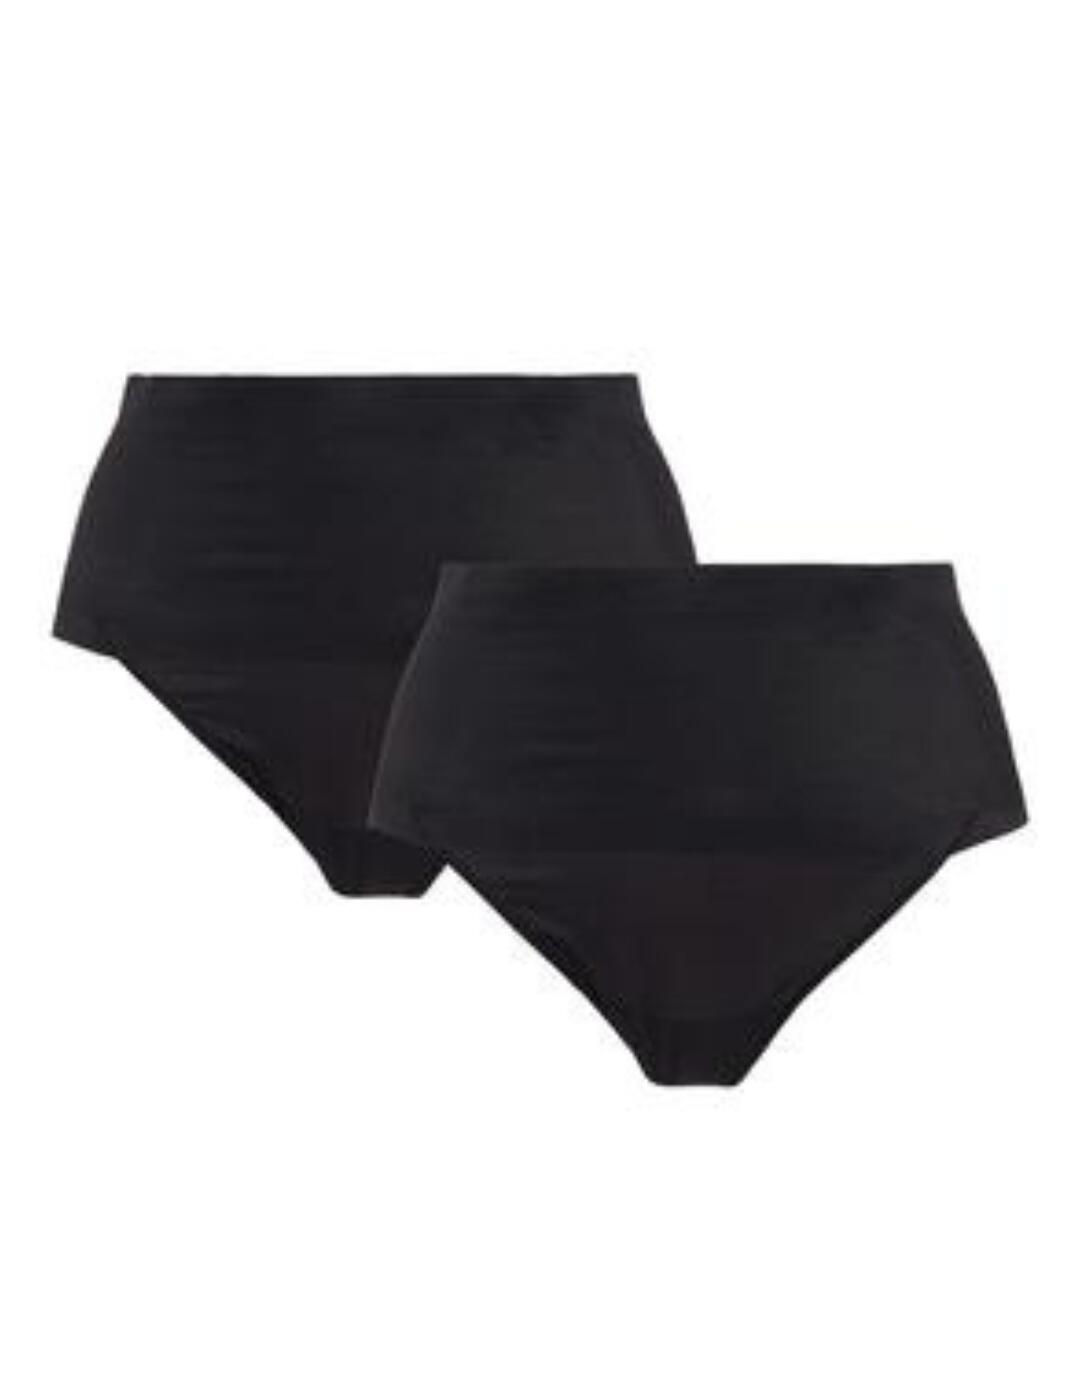 Maidenform Sleek Smoothers Shaping Briefs (2 Pack) Black